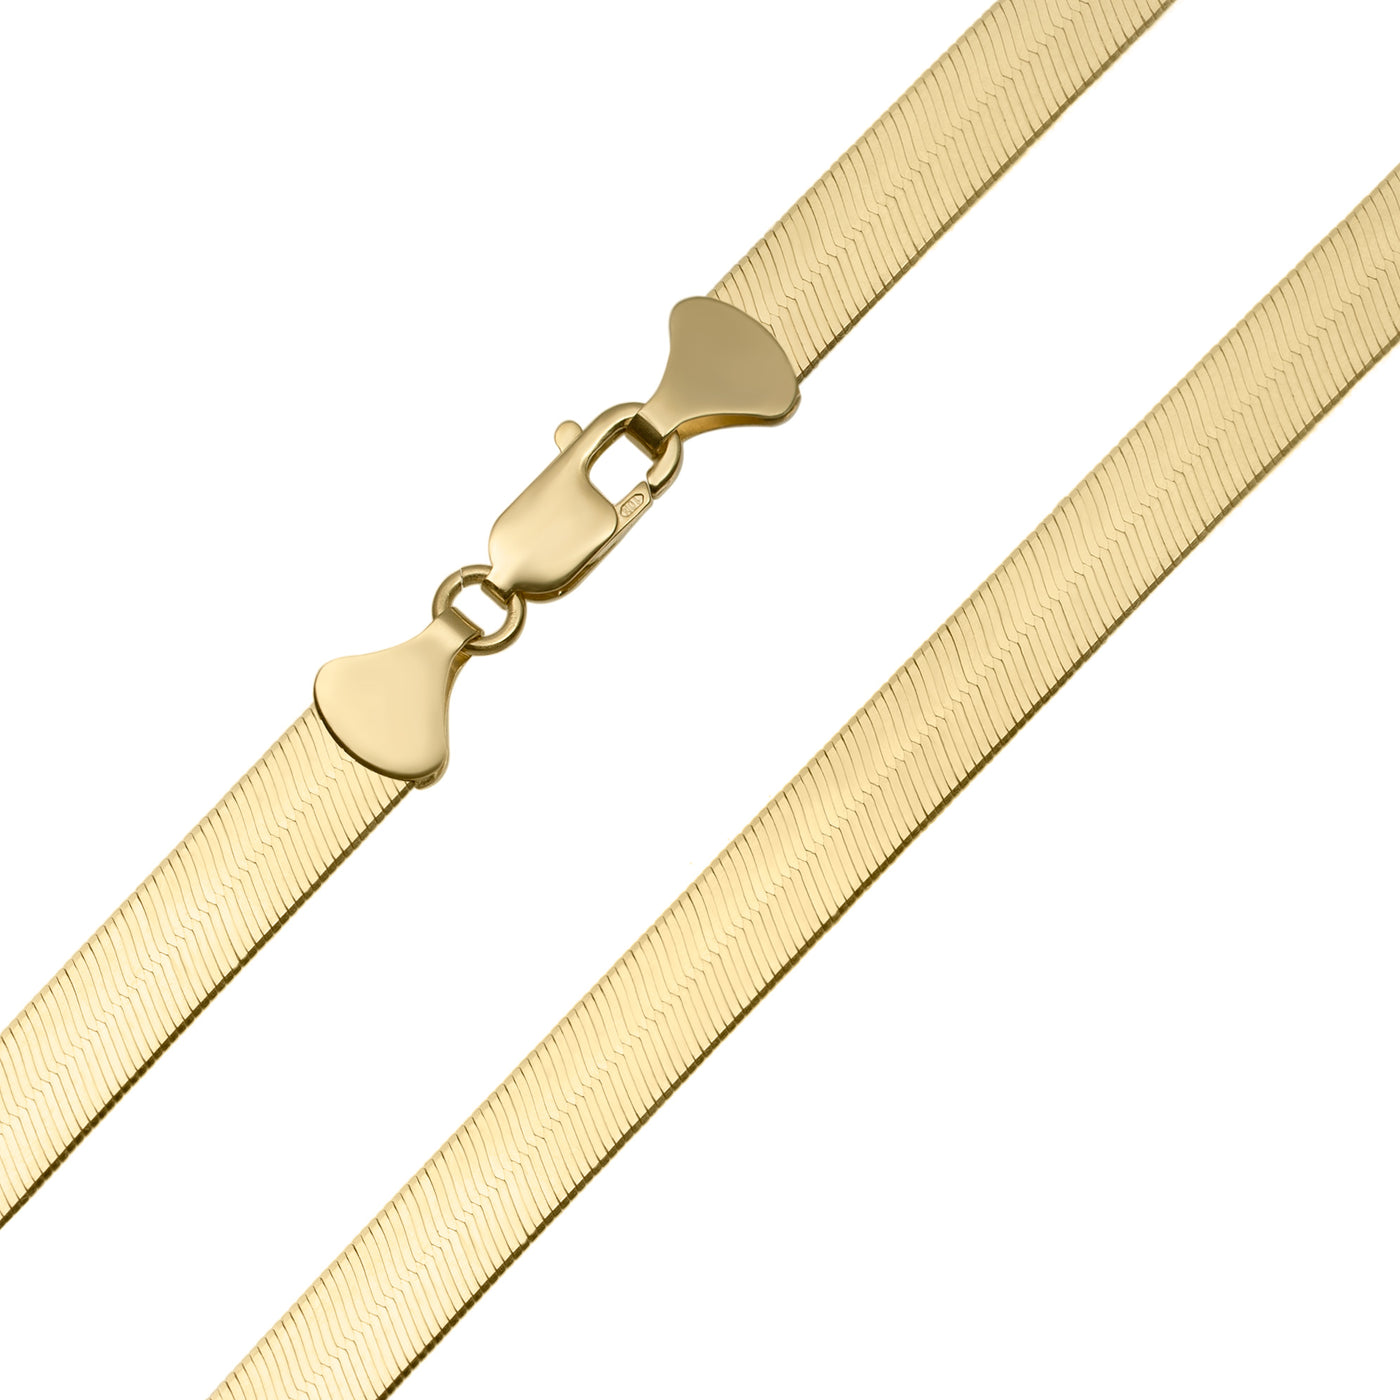 High Polished Herringbone Chain Necklace 10K & 14K Yellow Gold - Solid